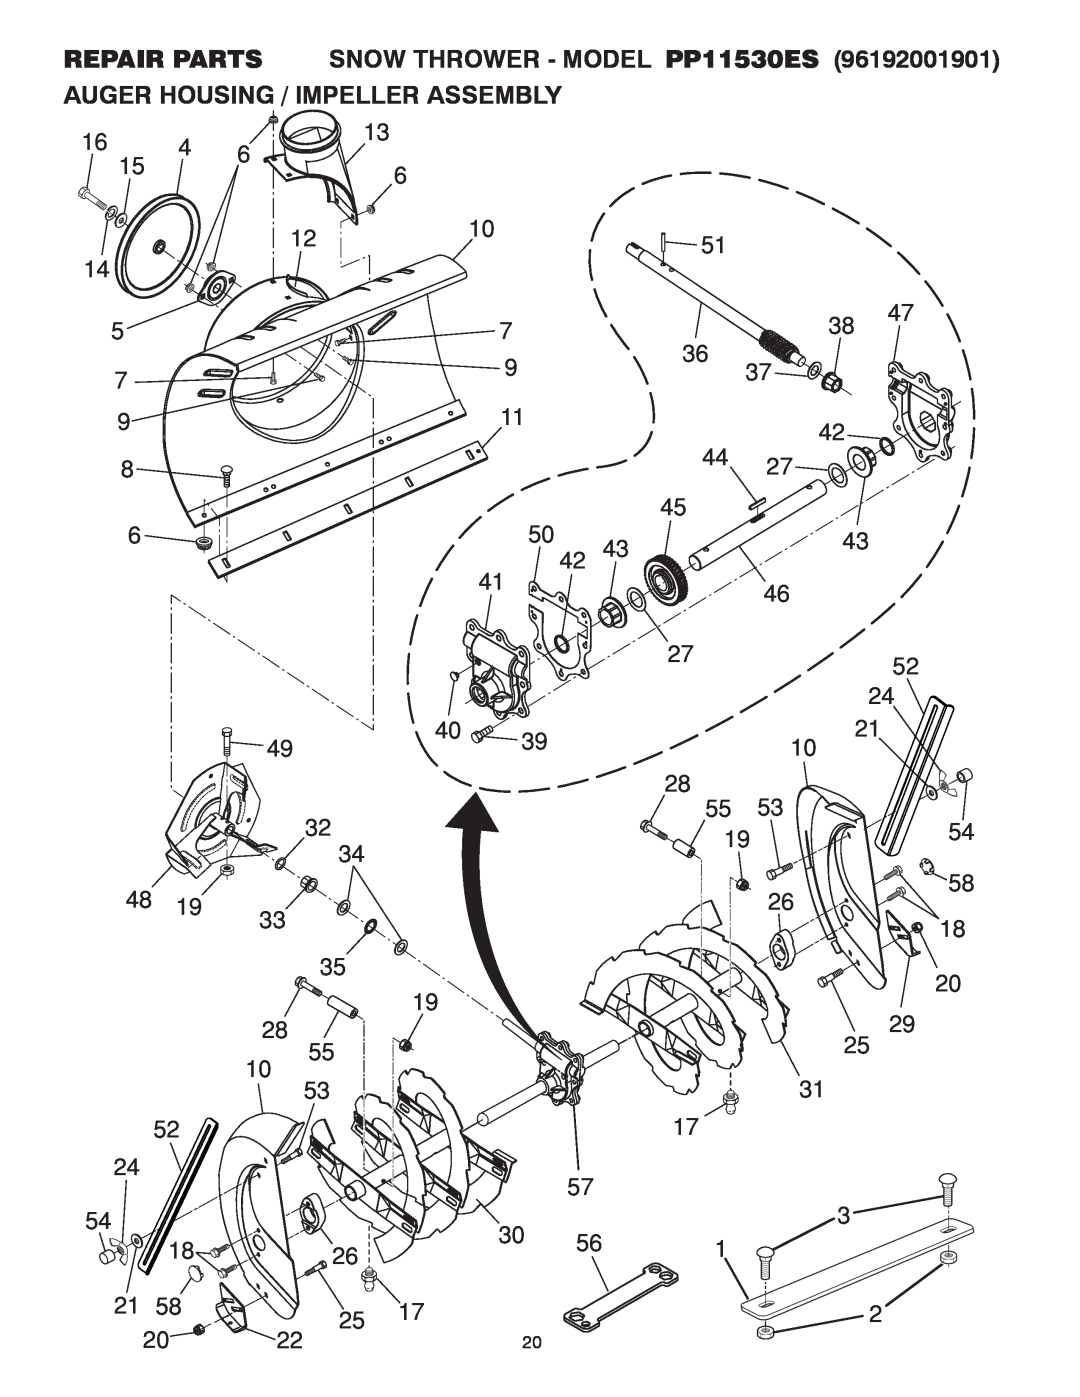 Poulan 96192001901, 415153 owner manual REPAIR PARTS SNOW THROWER - MODEL PP11530ES, Auger Housing / Impeller Assembly, 2220 